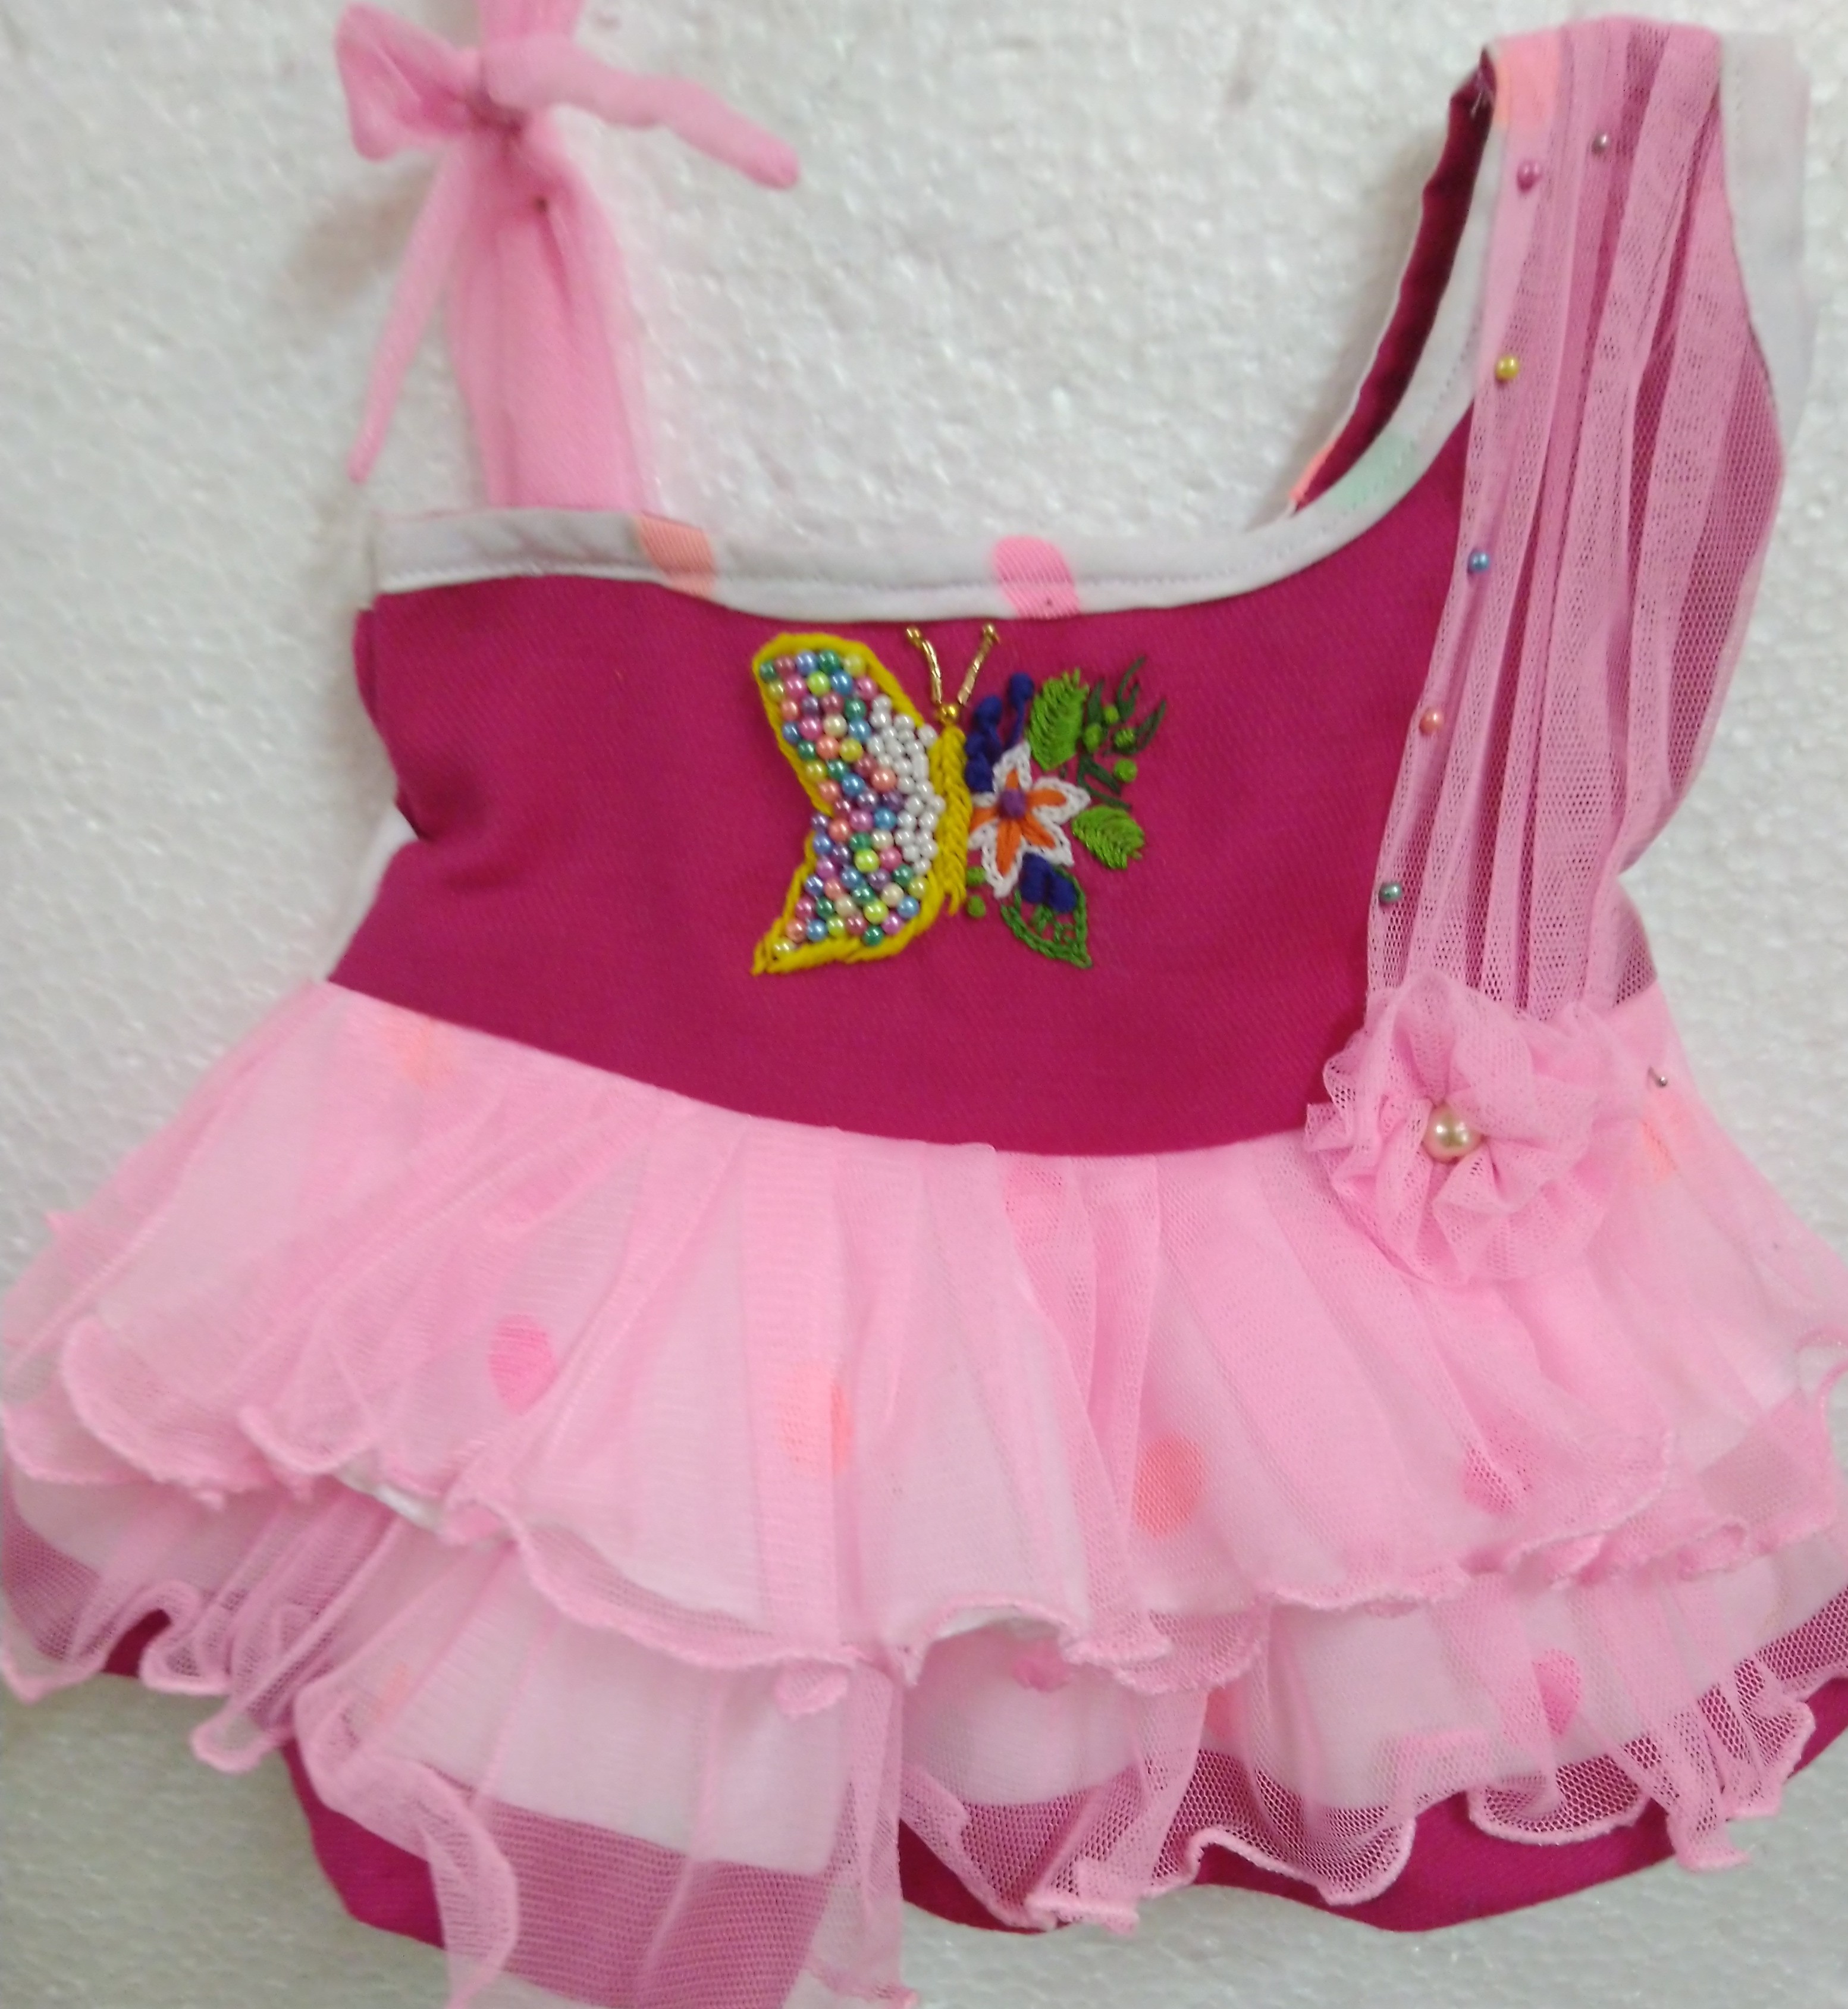 1 Year Baby Frock, 1 Year Baby Frock Designs - Designer Sewing by Jyoti-thanhphatduhoc.com.vn